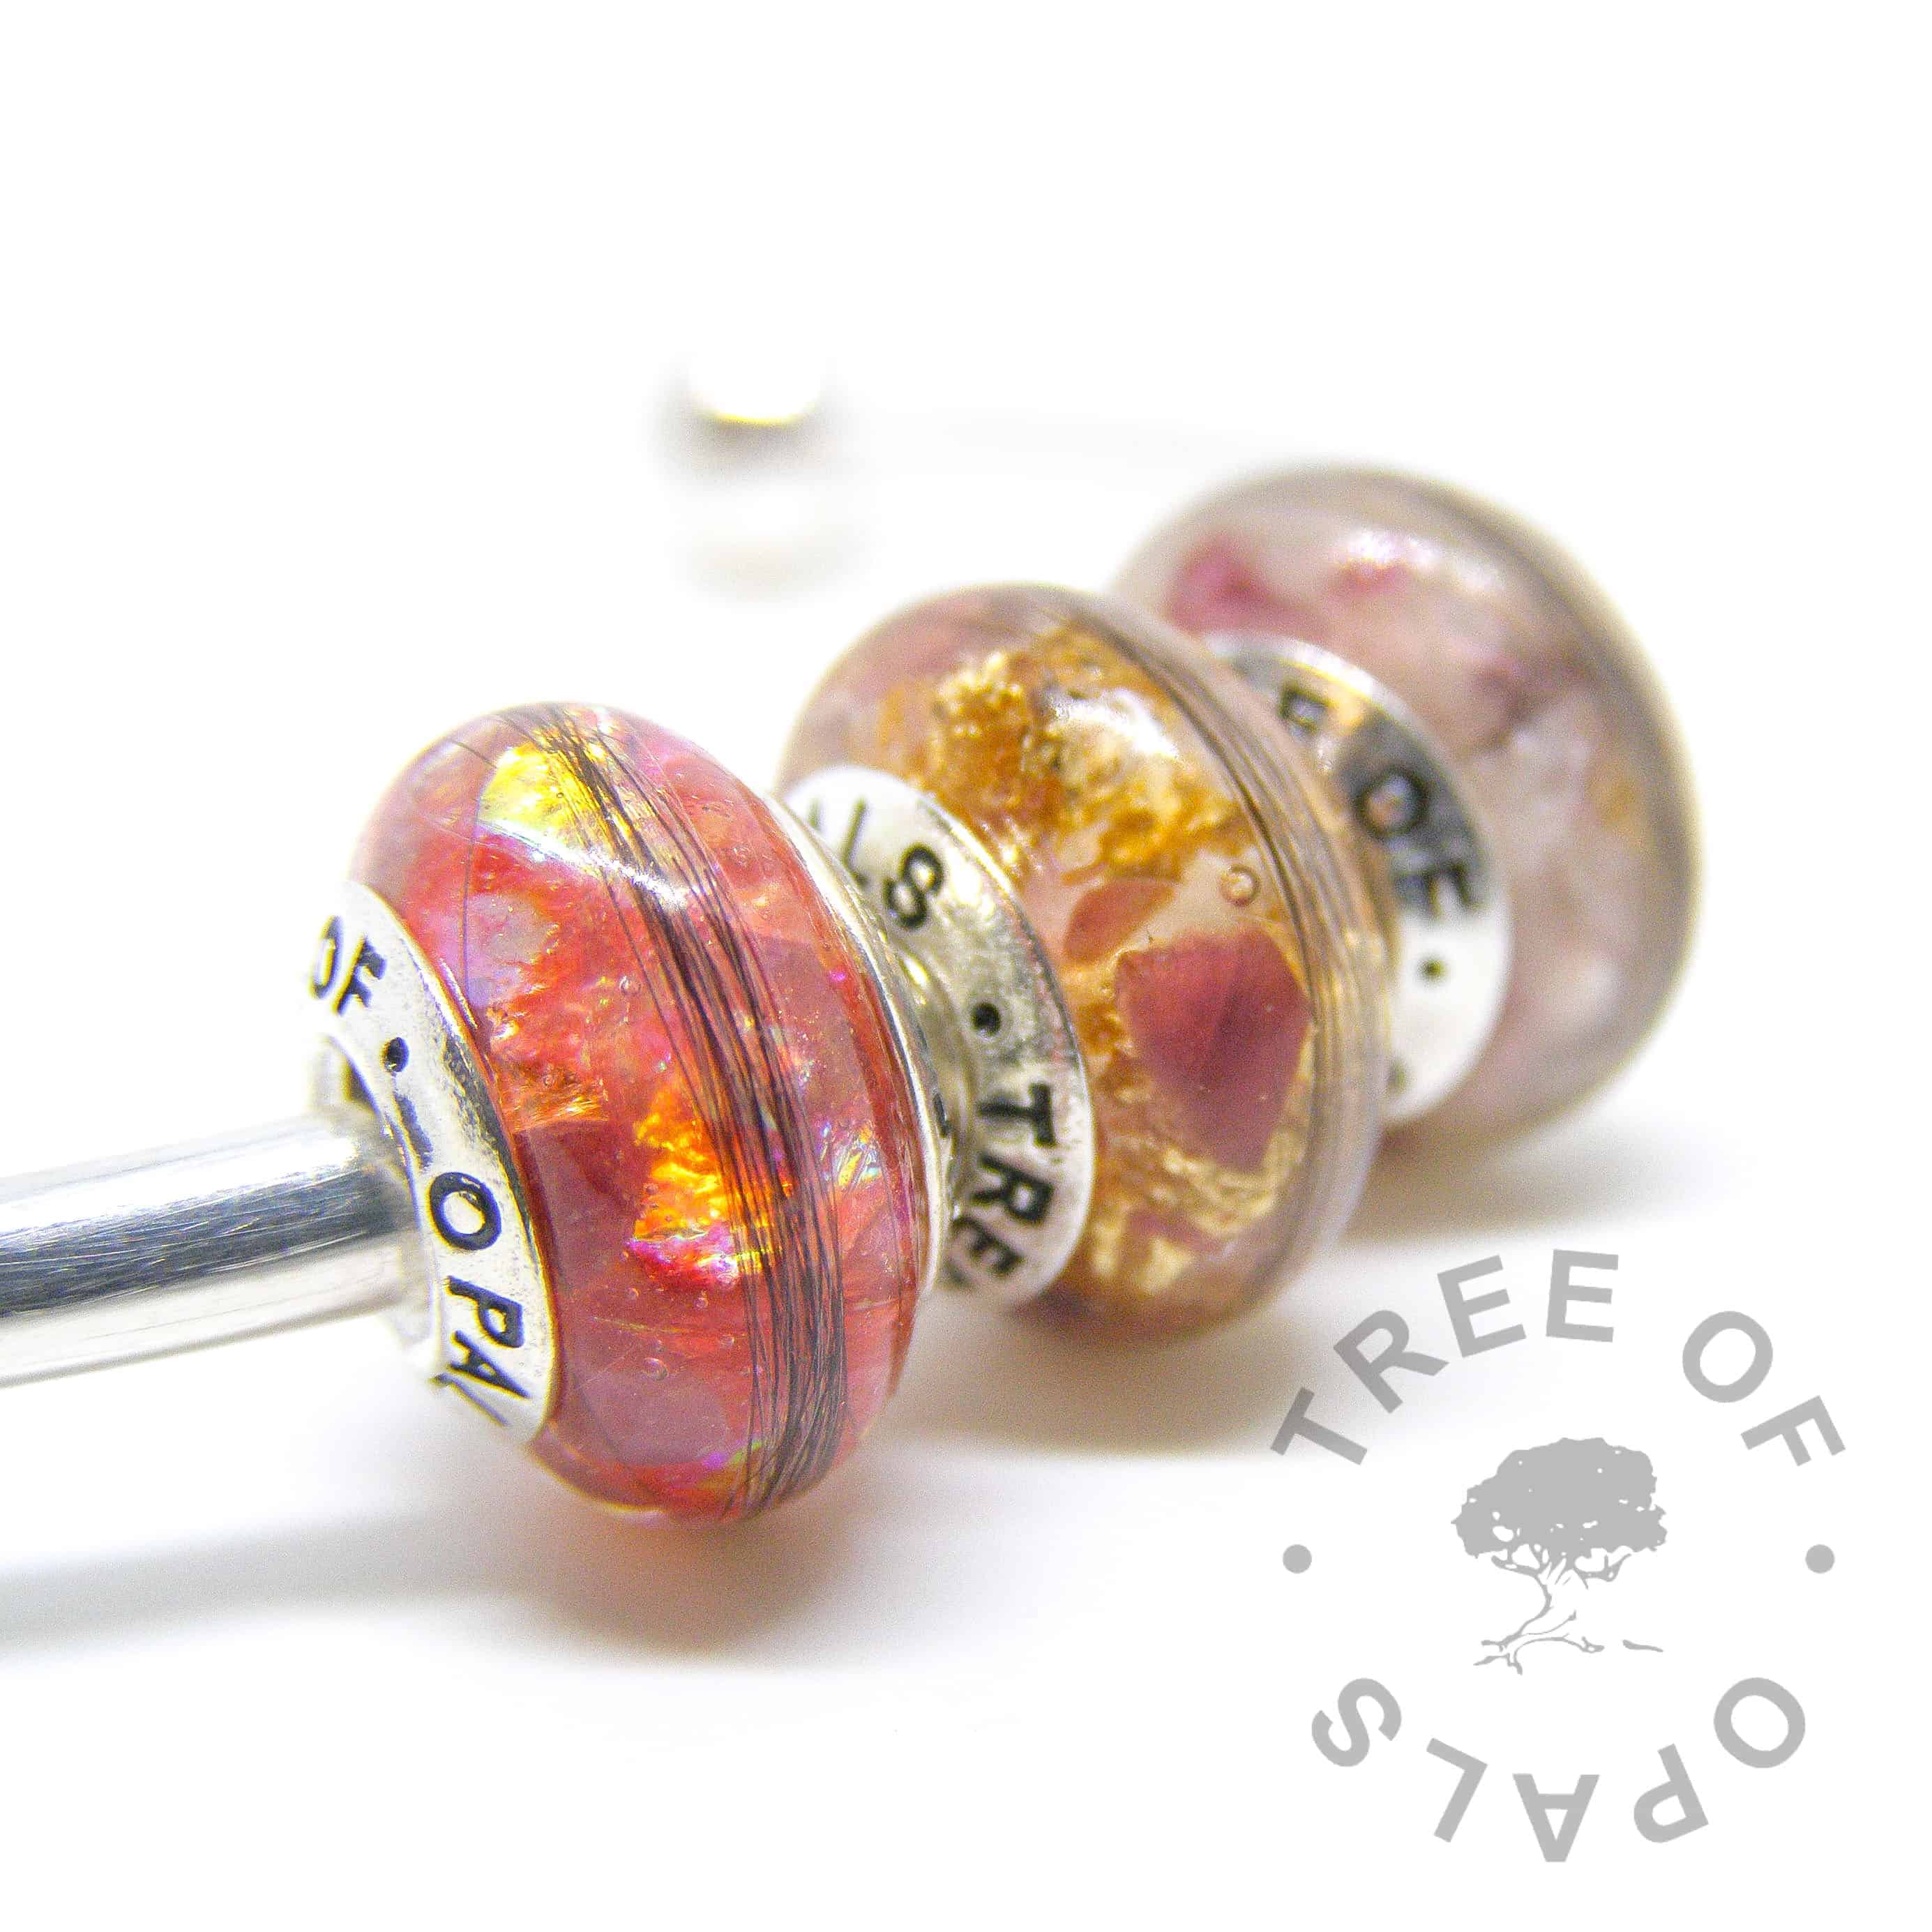 lock of hair charm bead trio in resin, ruby July birthstone, red opalescent flakes and genuine gold leaf with solid sterling silver Tree of Opals branded cores